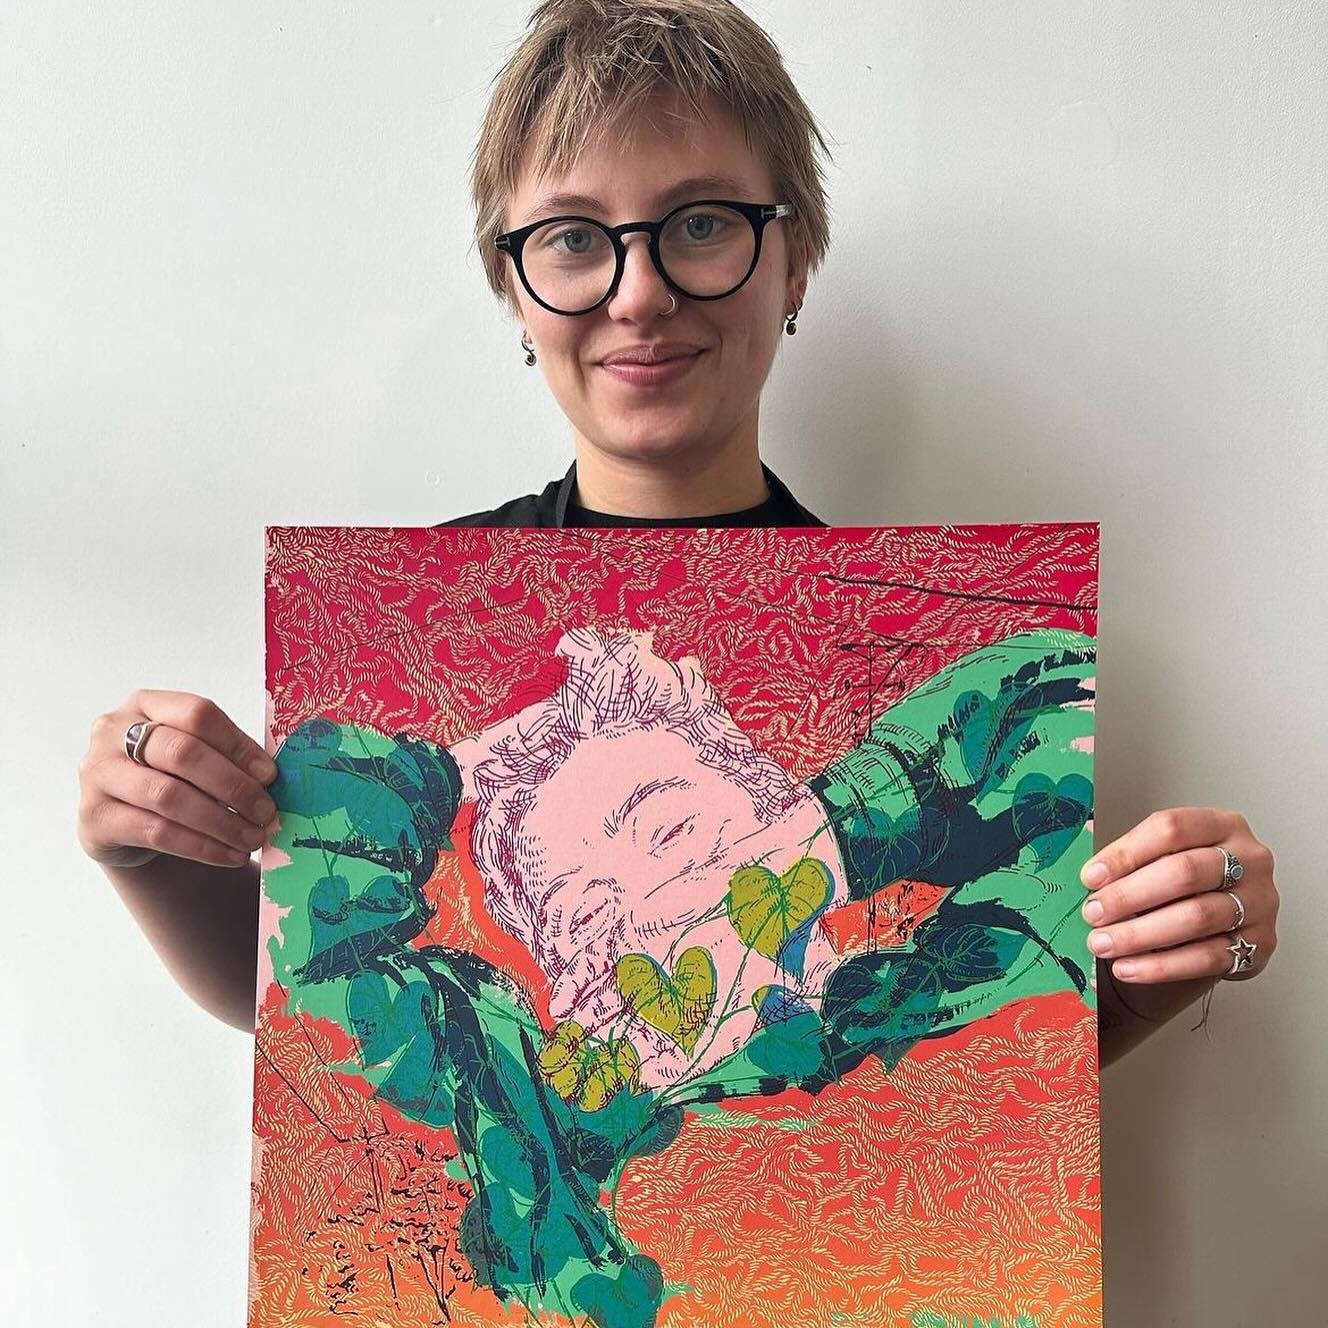 Everyone meet the print-making extraordinaire and past Rewind Press Intern, Felicity aka @fofo_power ⭐️

Felicity Gunn is a visual artist working between Central and Southern Ohio. Trained in print-based media, Felicity strives to learn about communi